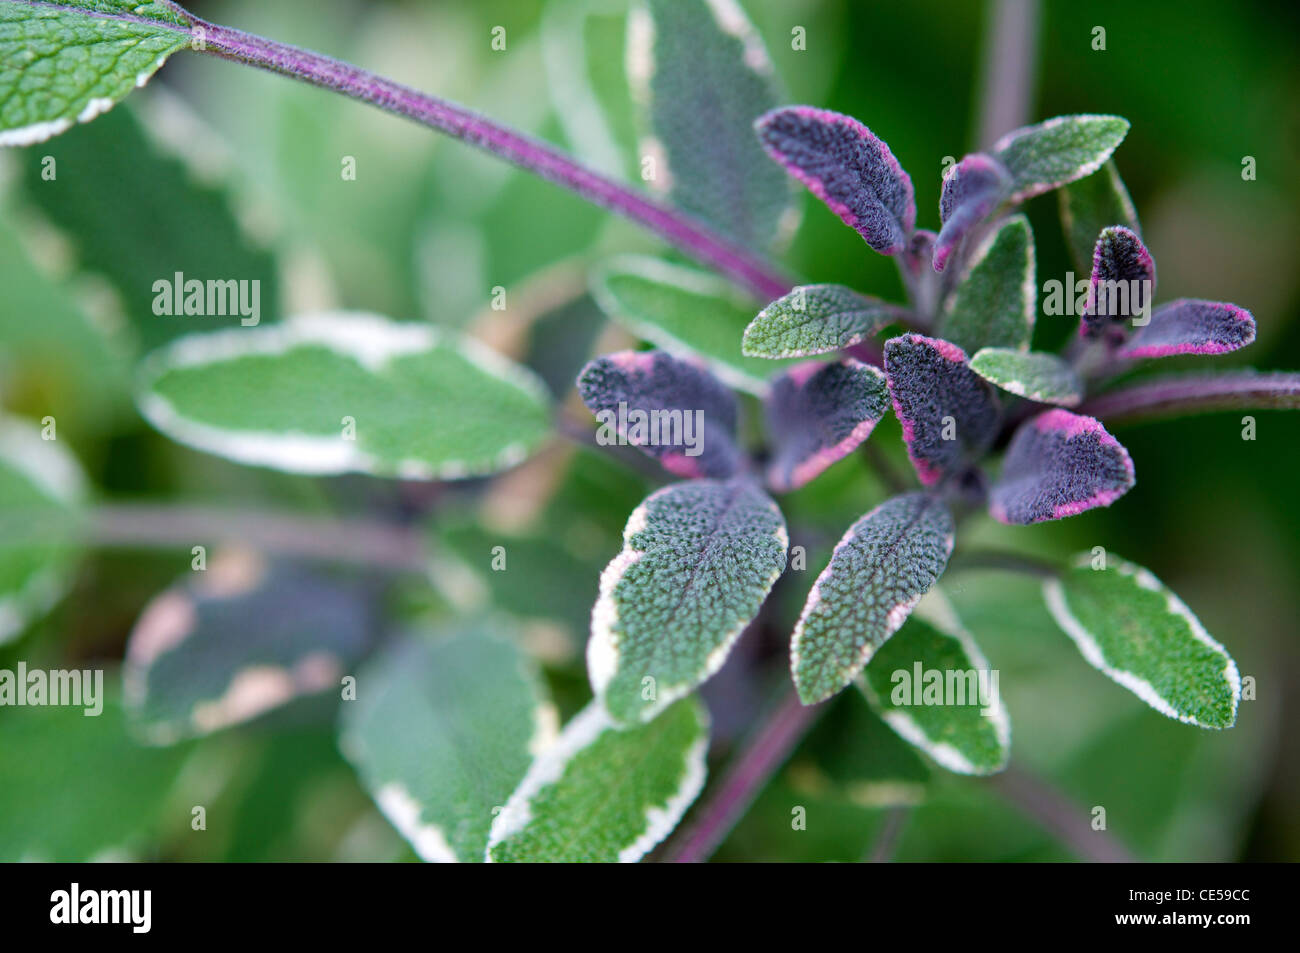 Tricolor Garden Sage is a form of regular culinary Garden Sage and can be used in place of Garden Sage in any recipe. Stock Photo